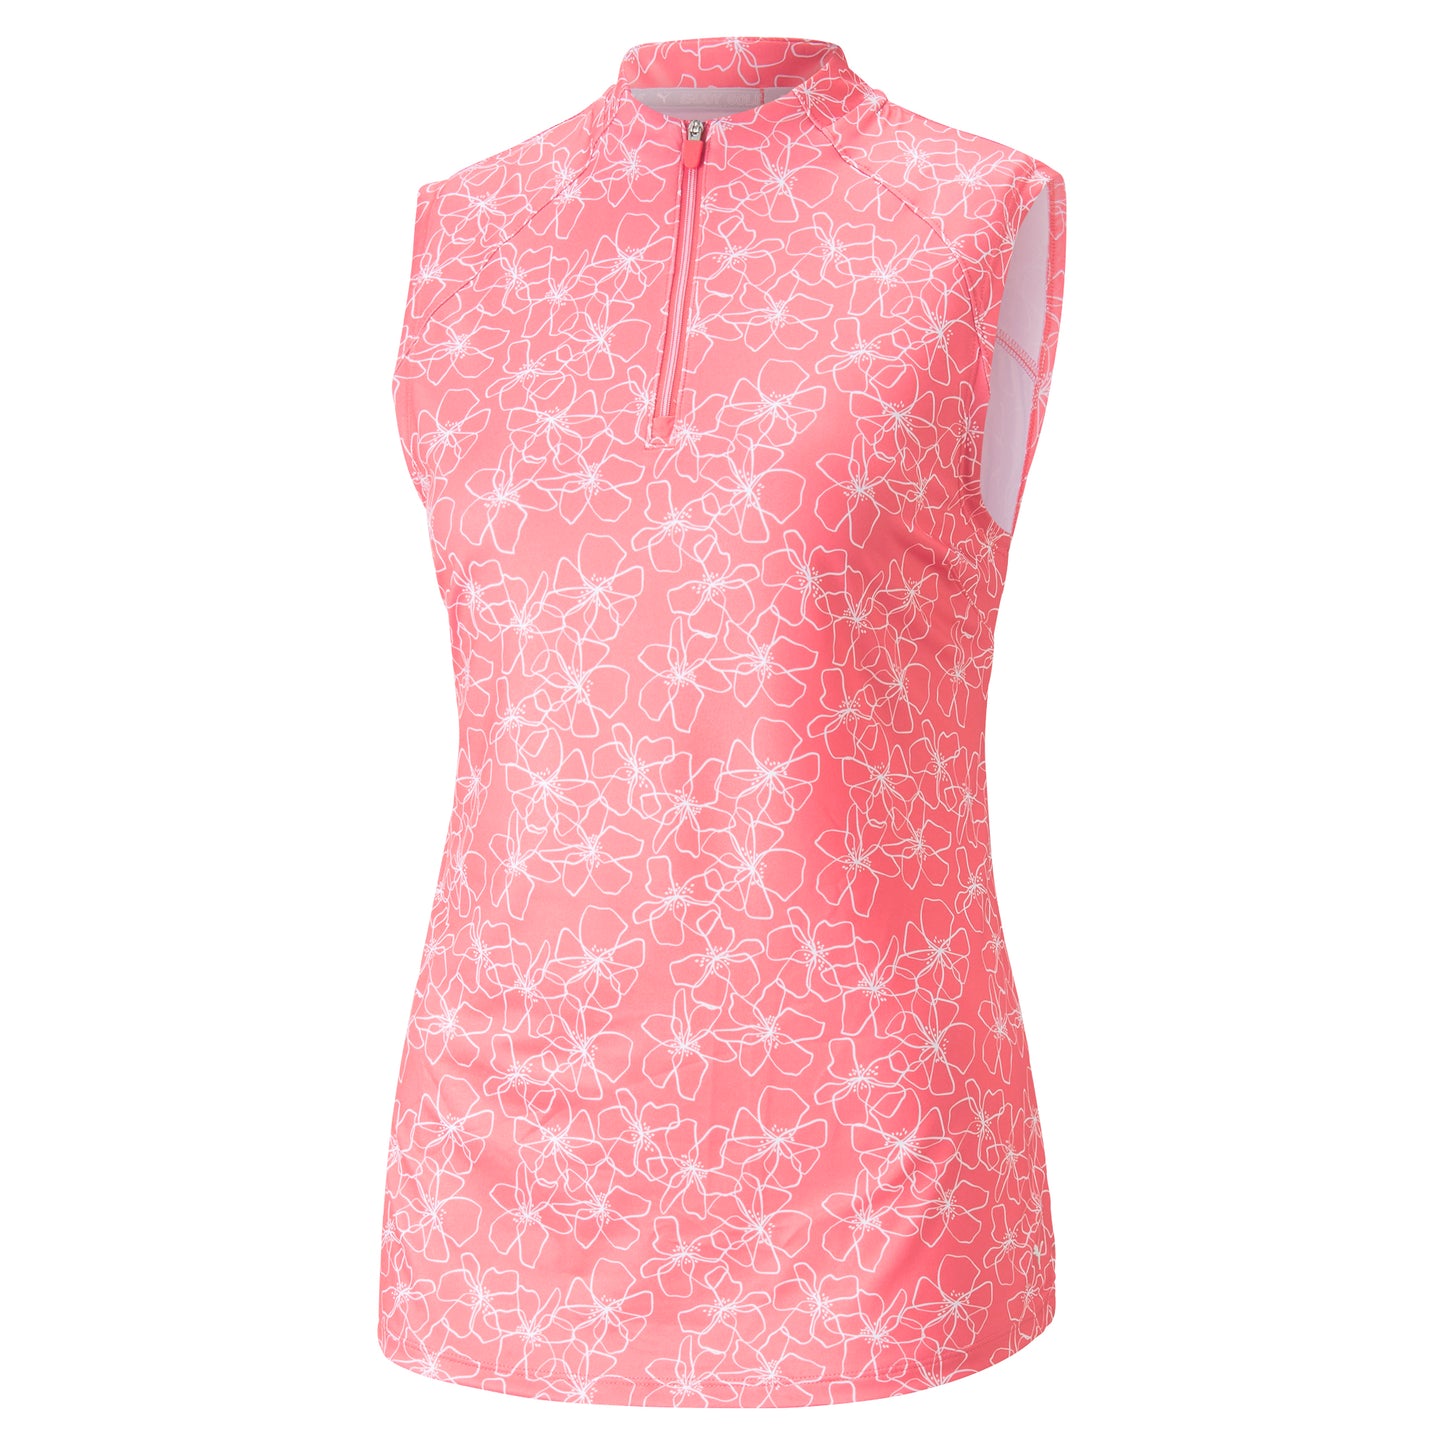 Puma Ladies Cloudspun Sleeveless Polo Shirt with Island Flower Print in Loveable